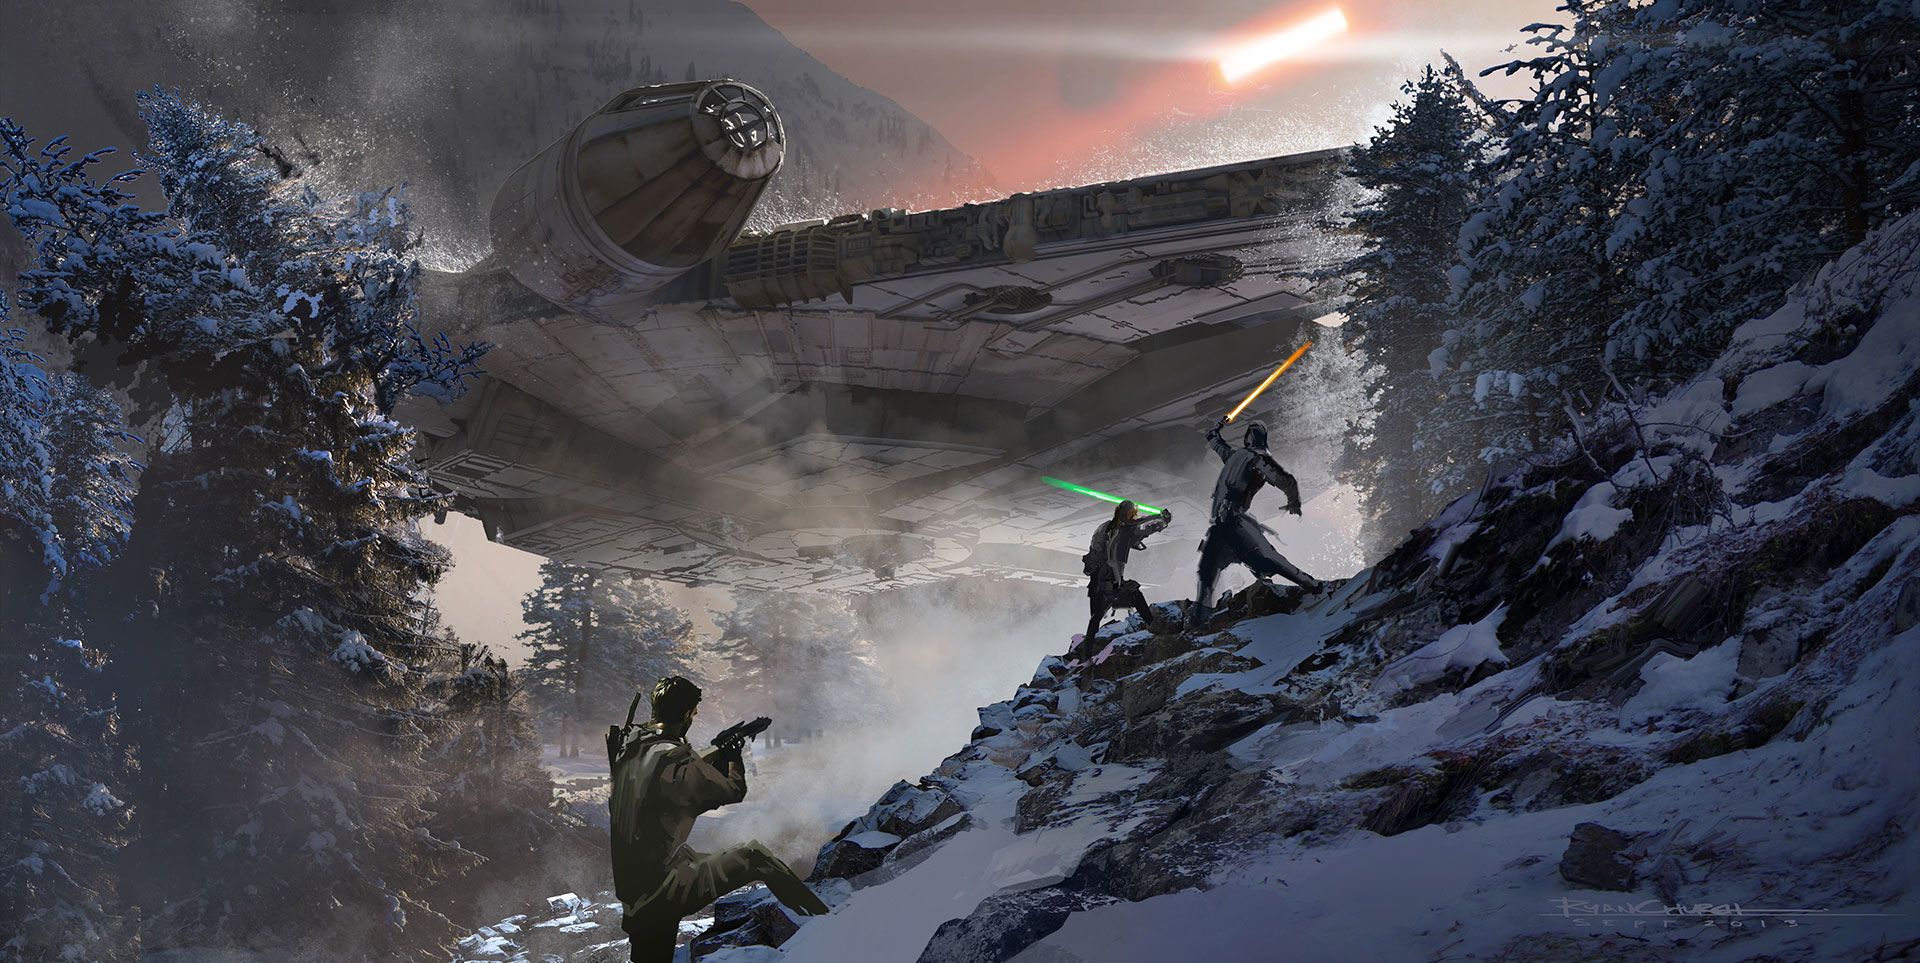 Star Wars: The Force Awakens Concept Art Images Revealed | Collider1920 x 963